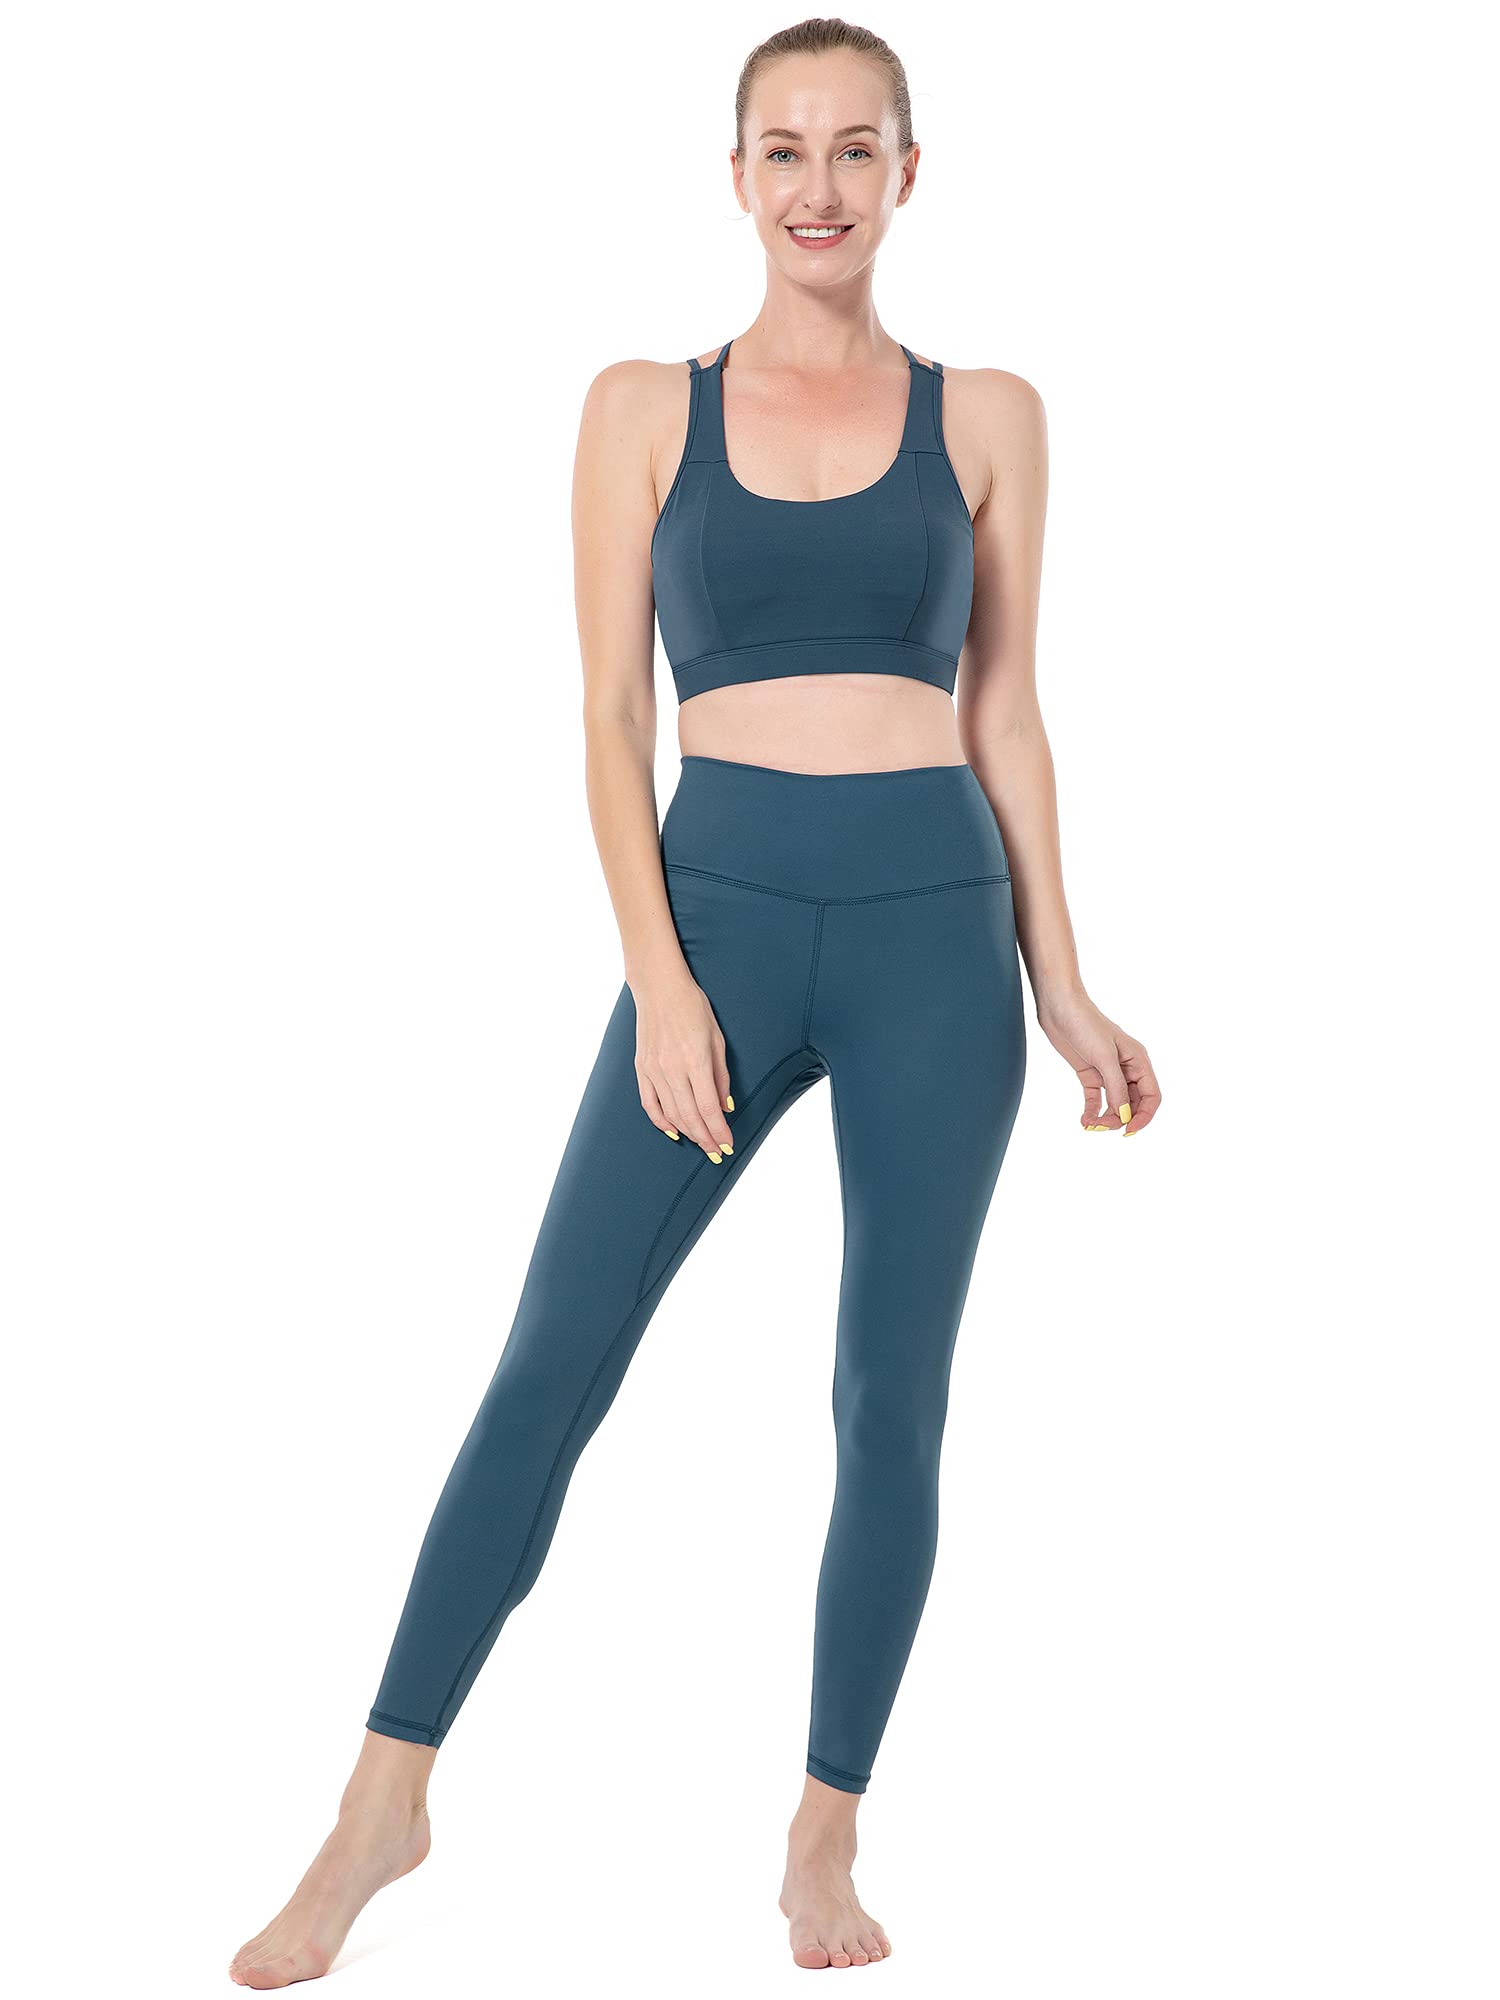 Yoga Pants Seamless Leggings Size M High Waist Workout Pants With Inner Pockets, - Opticdeals